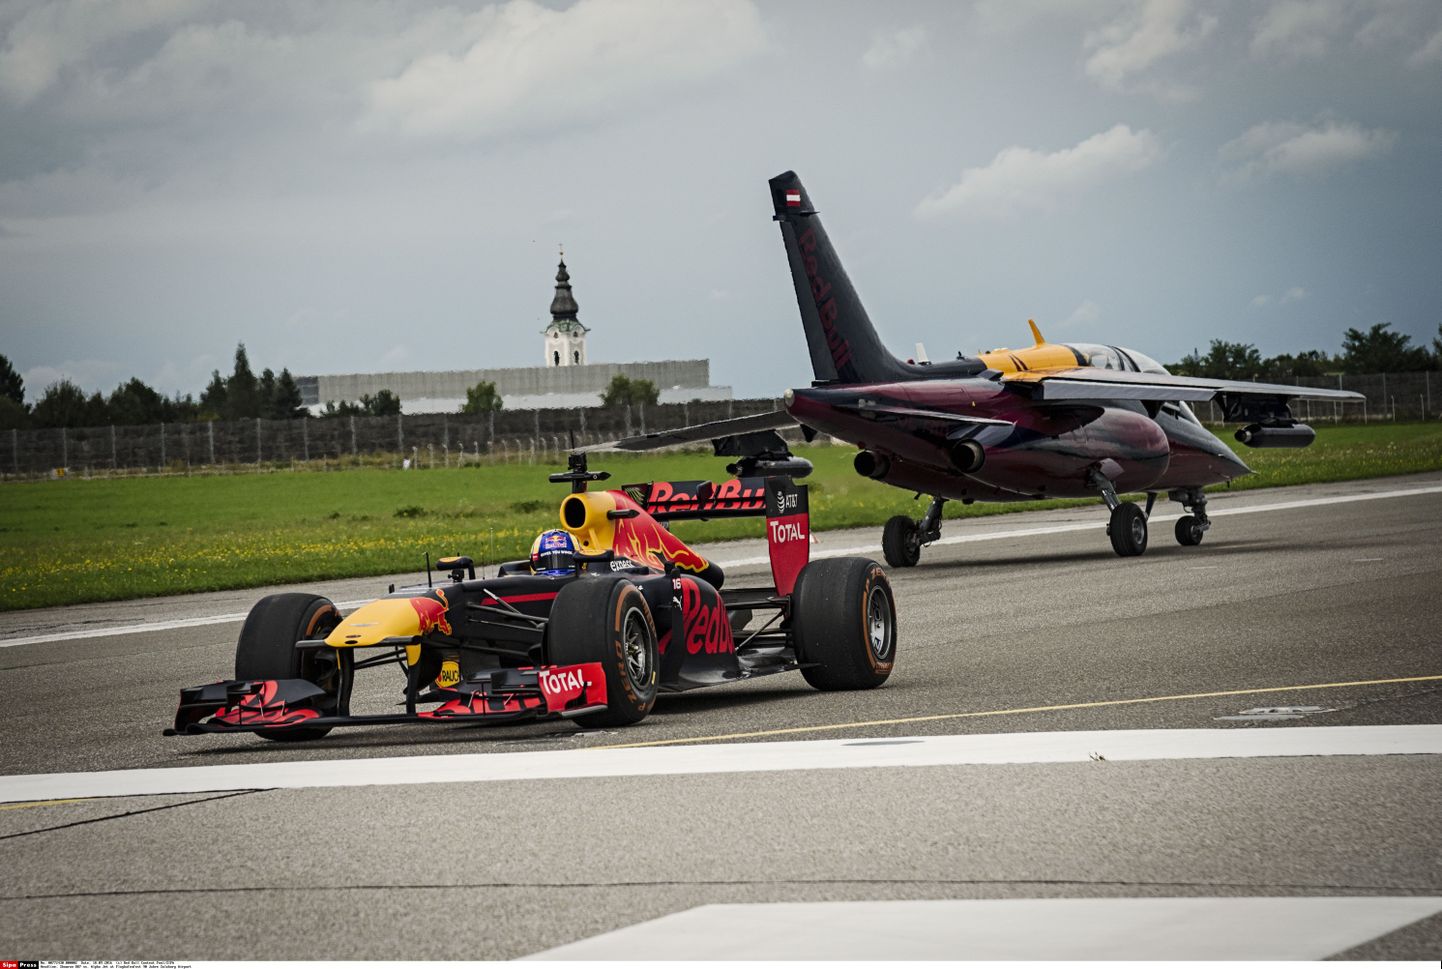 Patrick Friesacher drives to the start of the showrun RB7 vs. Alpha Jet at Flughafenfest 90 Jahre Salzburg Airport on September 19th, 2016. // Markus Berger / Red Bull Content Pool //  HANDOUT / EDITORIAL USE ONLY! Please note: Fees charged by the agency are for the agency’s services only, and do not, nor are they intended to, convey to the user any ownership of Copyright or License in the material. The agency does not claim any ownership including but not limited to Copyright or License in the attached material. By publishing this material you expressly agree to indemnify and to hold the agency and its directors, shareholders and employees harmless from any loss, claims, damages, demands, expenses (including legal fees), or any causes of action or allegation against the agency arising out of or connected in any way with publication of the material.//REDBULLCONTENTPOOL_1252.006/Credit:Red Bull Content Pool/SIPA/1609191314